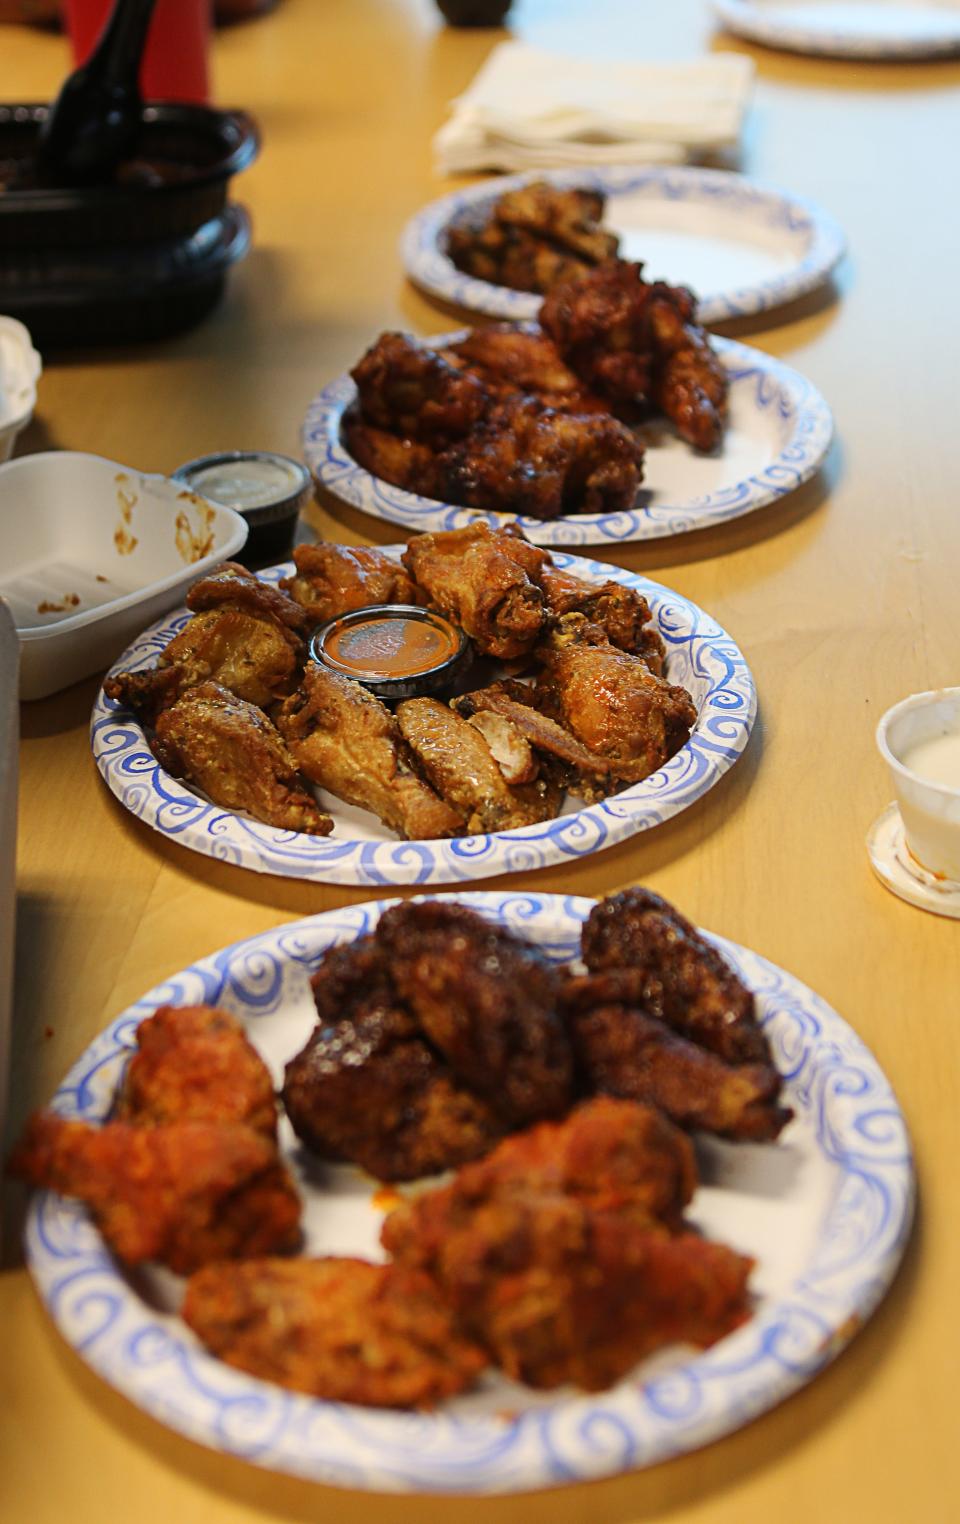 Reporters at The News Journal recently sampled the chicken wings that readers selected as the final four in the Delaware Wing Madness bracket challenge.